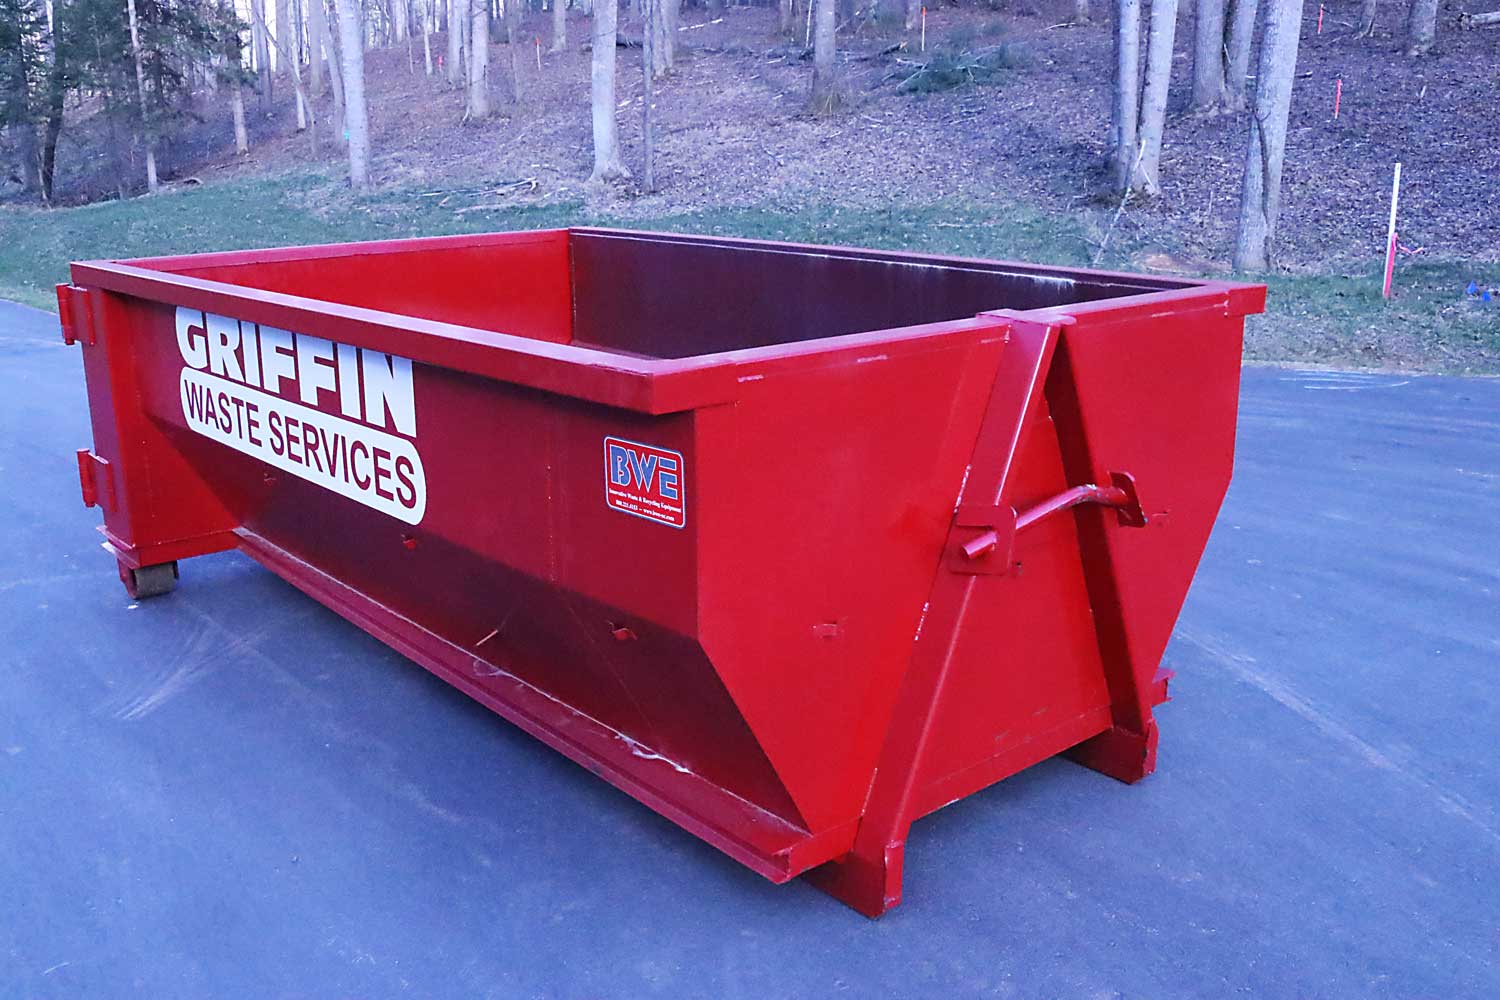 Griffin Waste Services of North Texas